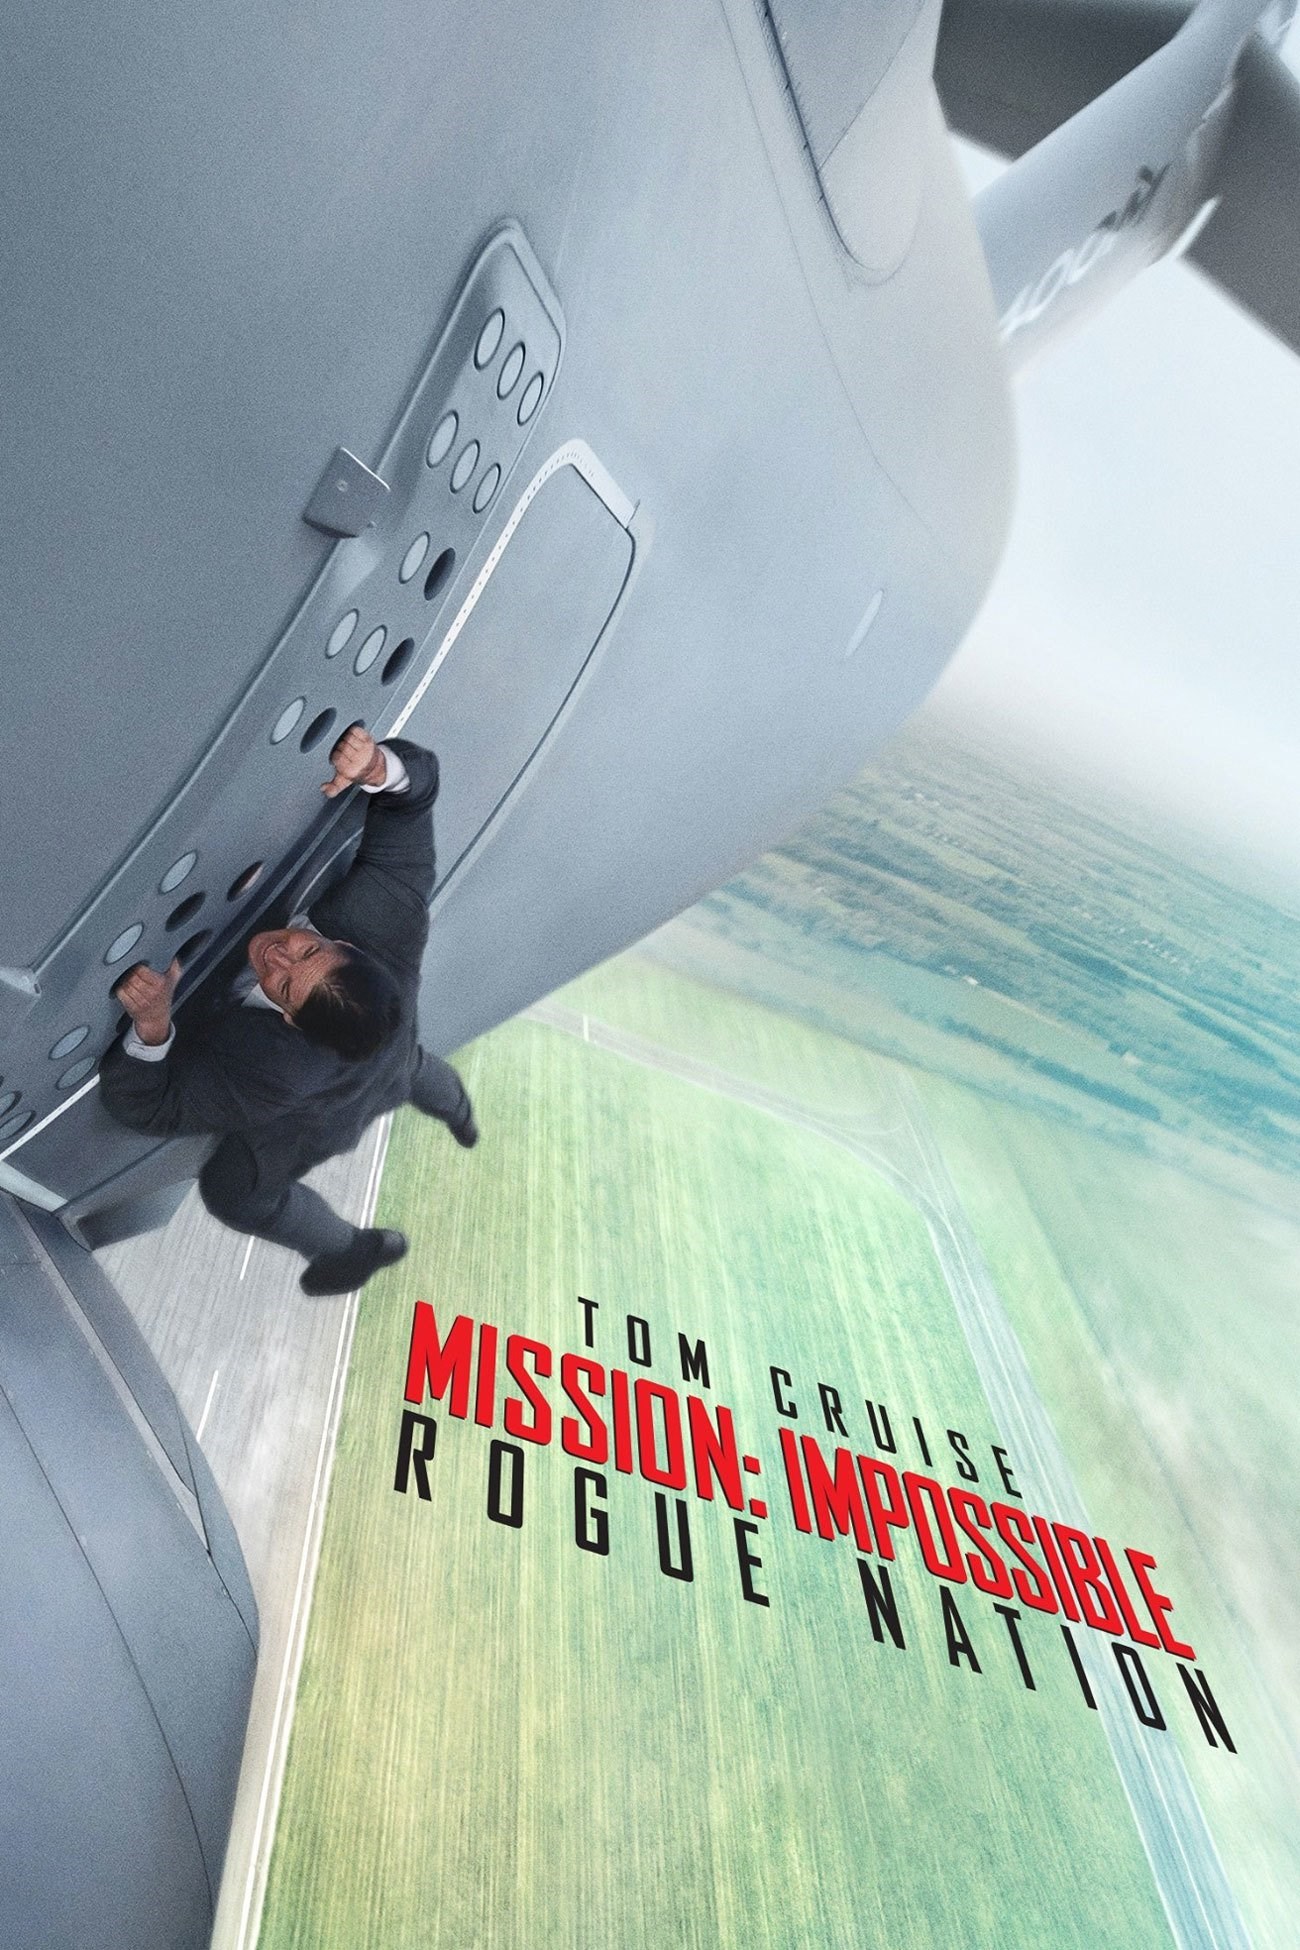 Mission: Impossible - Rogue Nation English Subtitle - YIFY